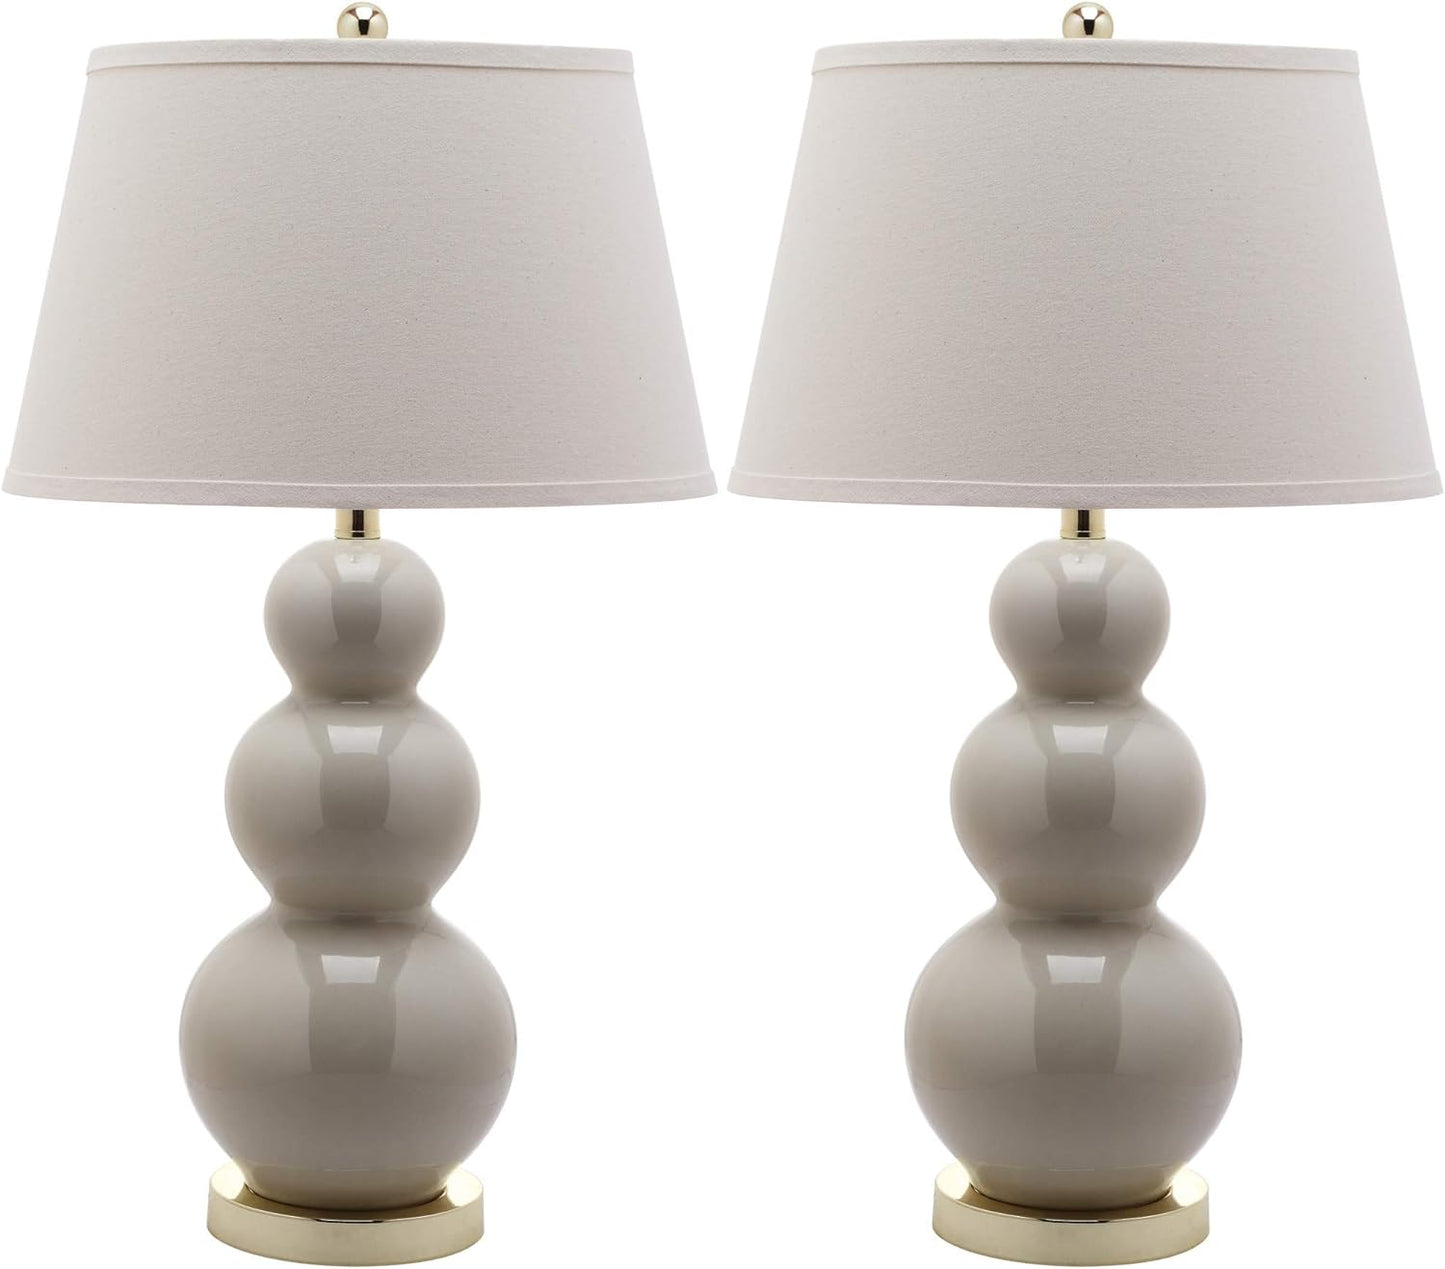 SAFAVIEH Lighting 27-inch Amy Triple Gourd Pearl White Table Lamp (Set of 2) - 16"x16"x28"